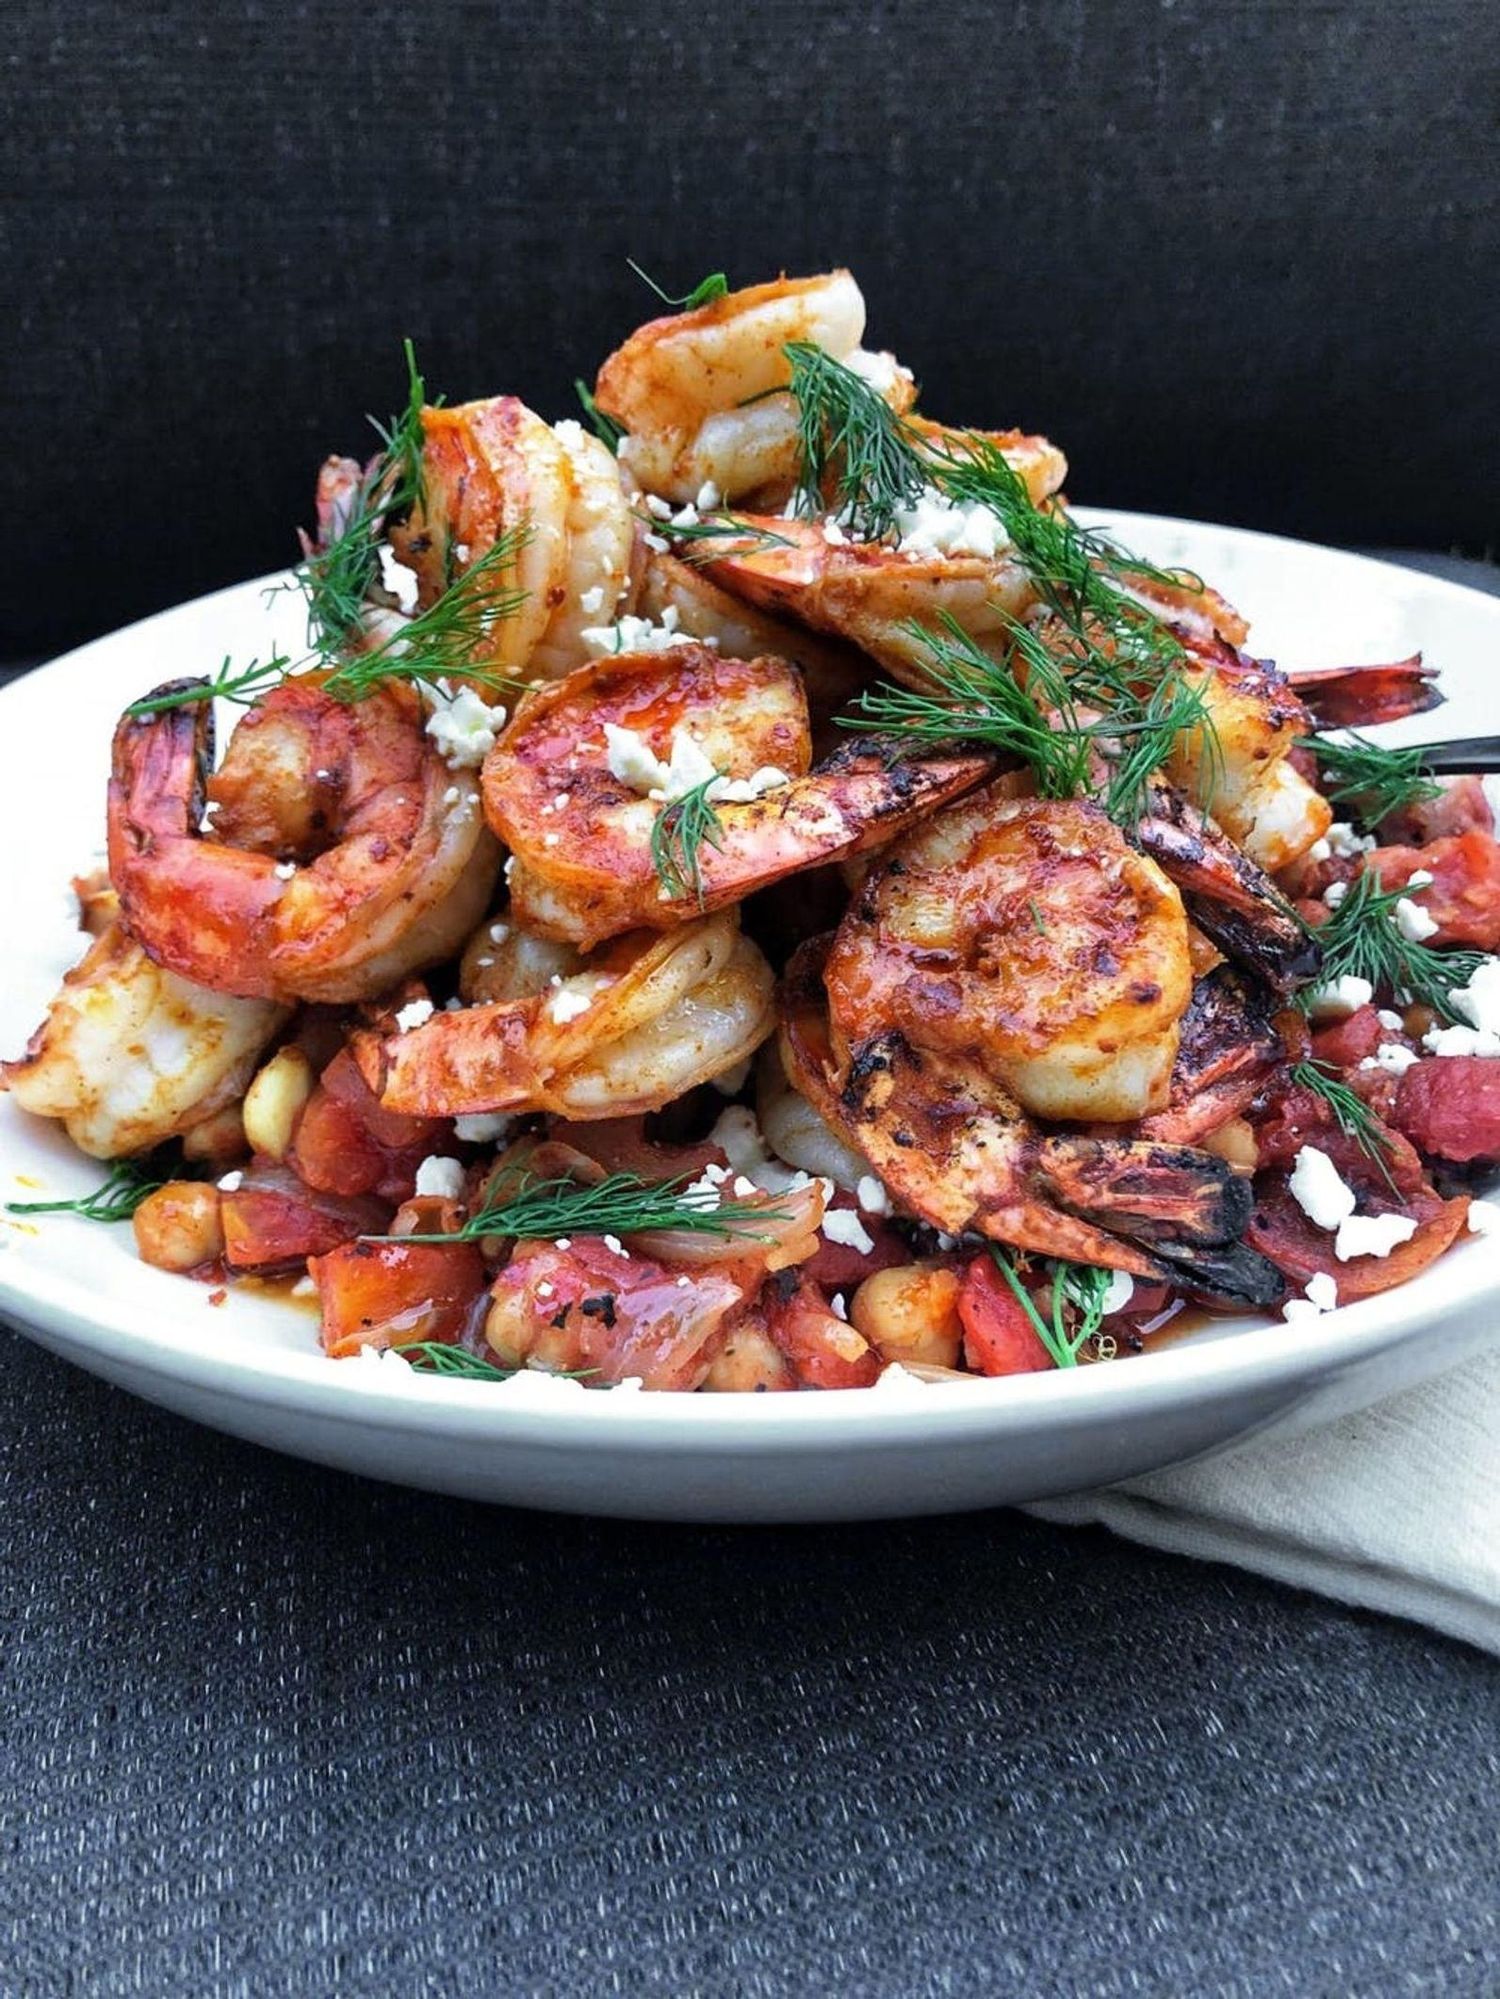 Harissa Grilled Shrimp with Chickpea-Dill Sauce